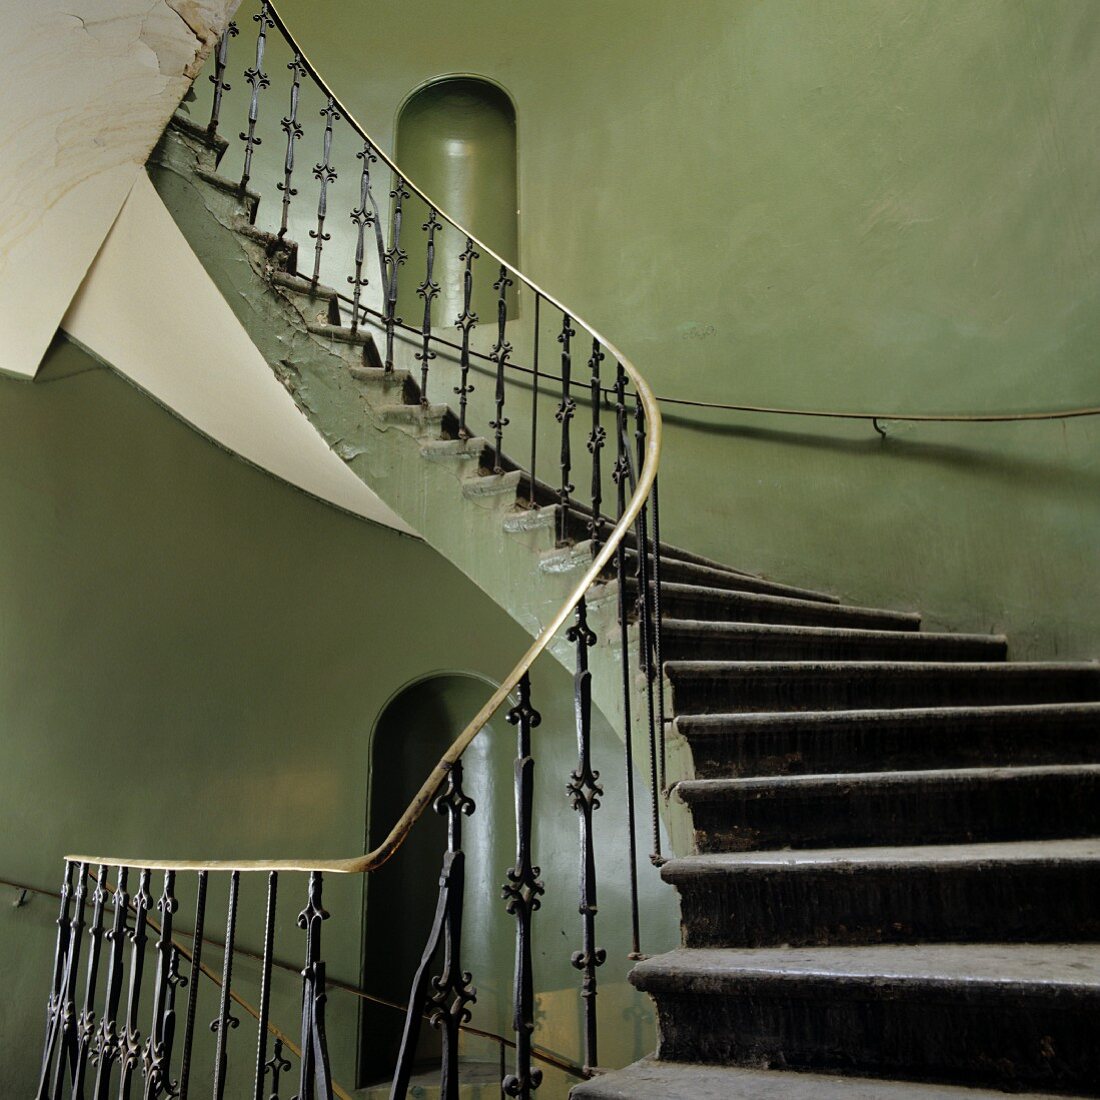 Vintage stairwell - spiral staircase with wrought iron balustrade and niches in gray-green painted walls